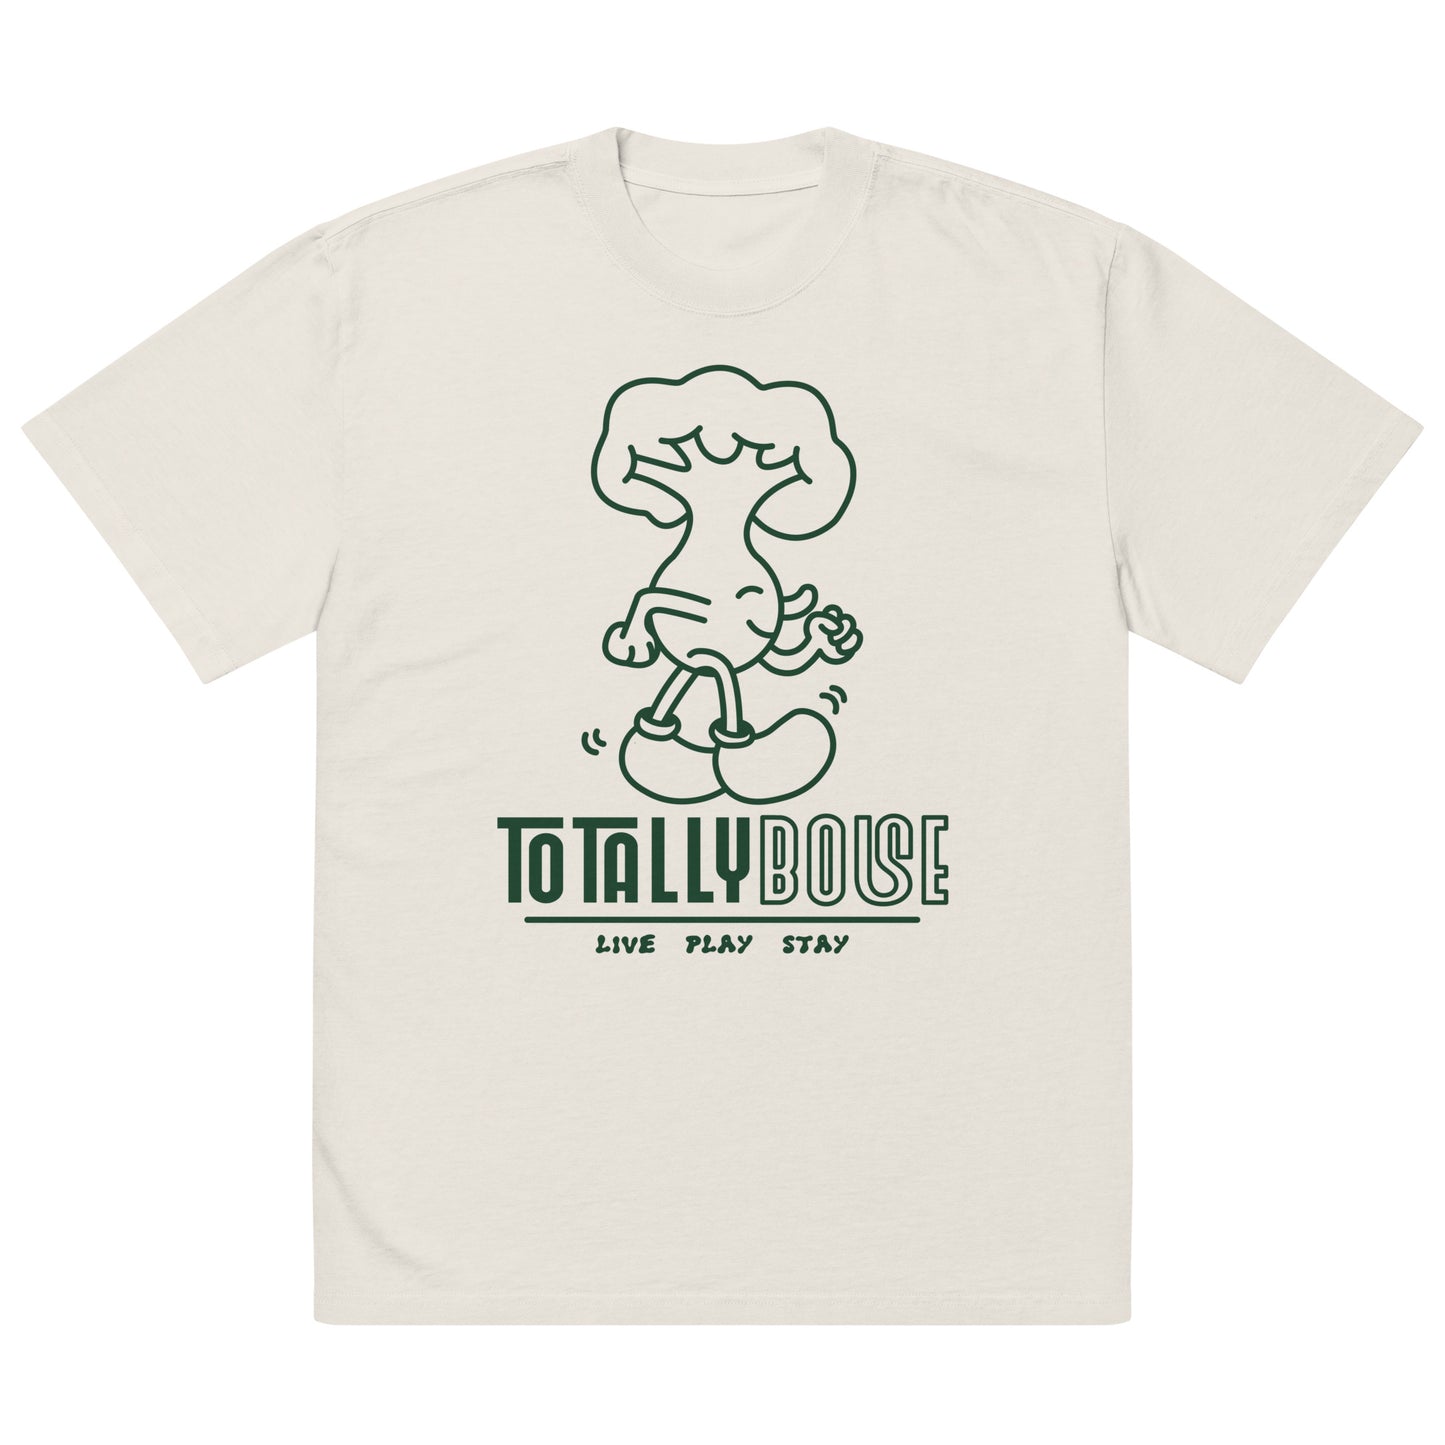 Totally Boise Live Play Stay Oversized Faded T-shirt